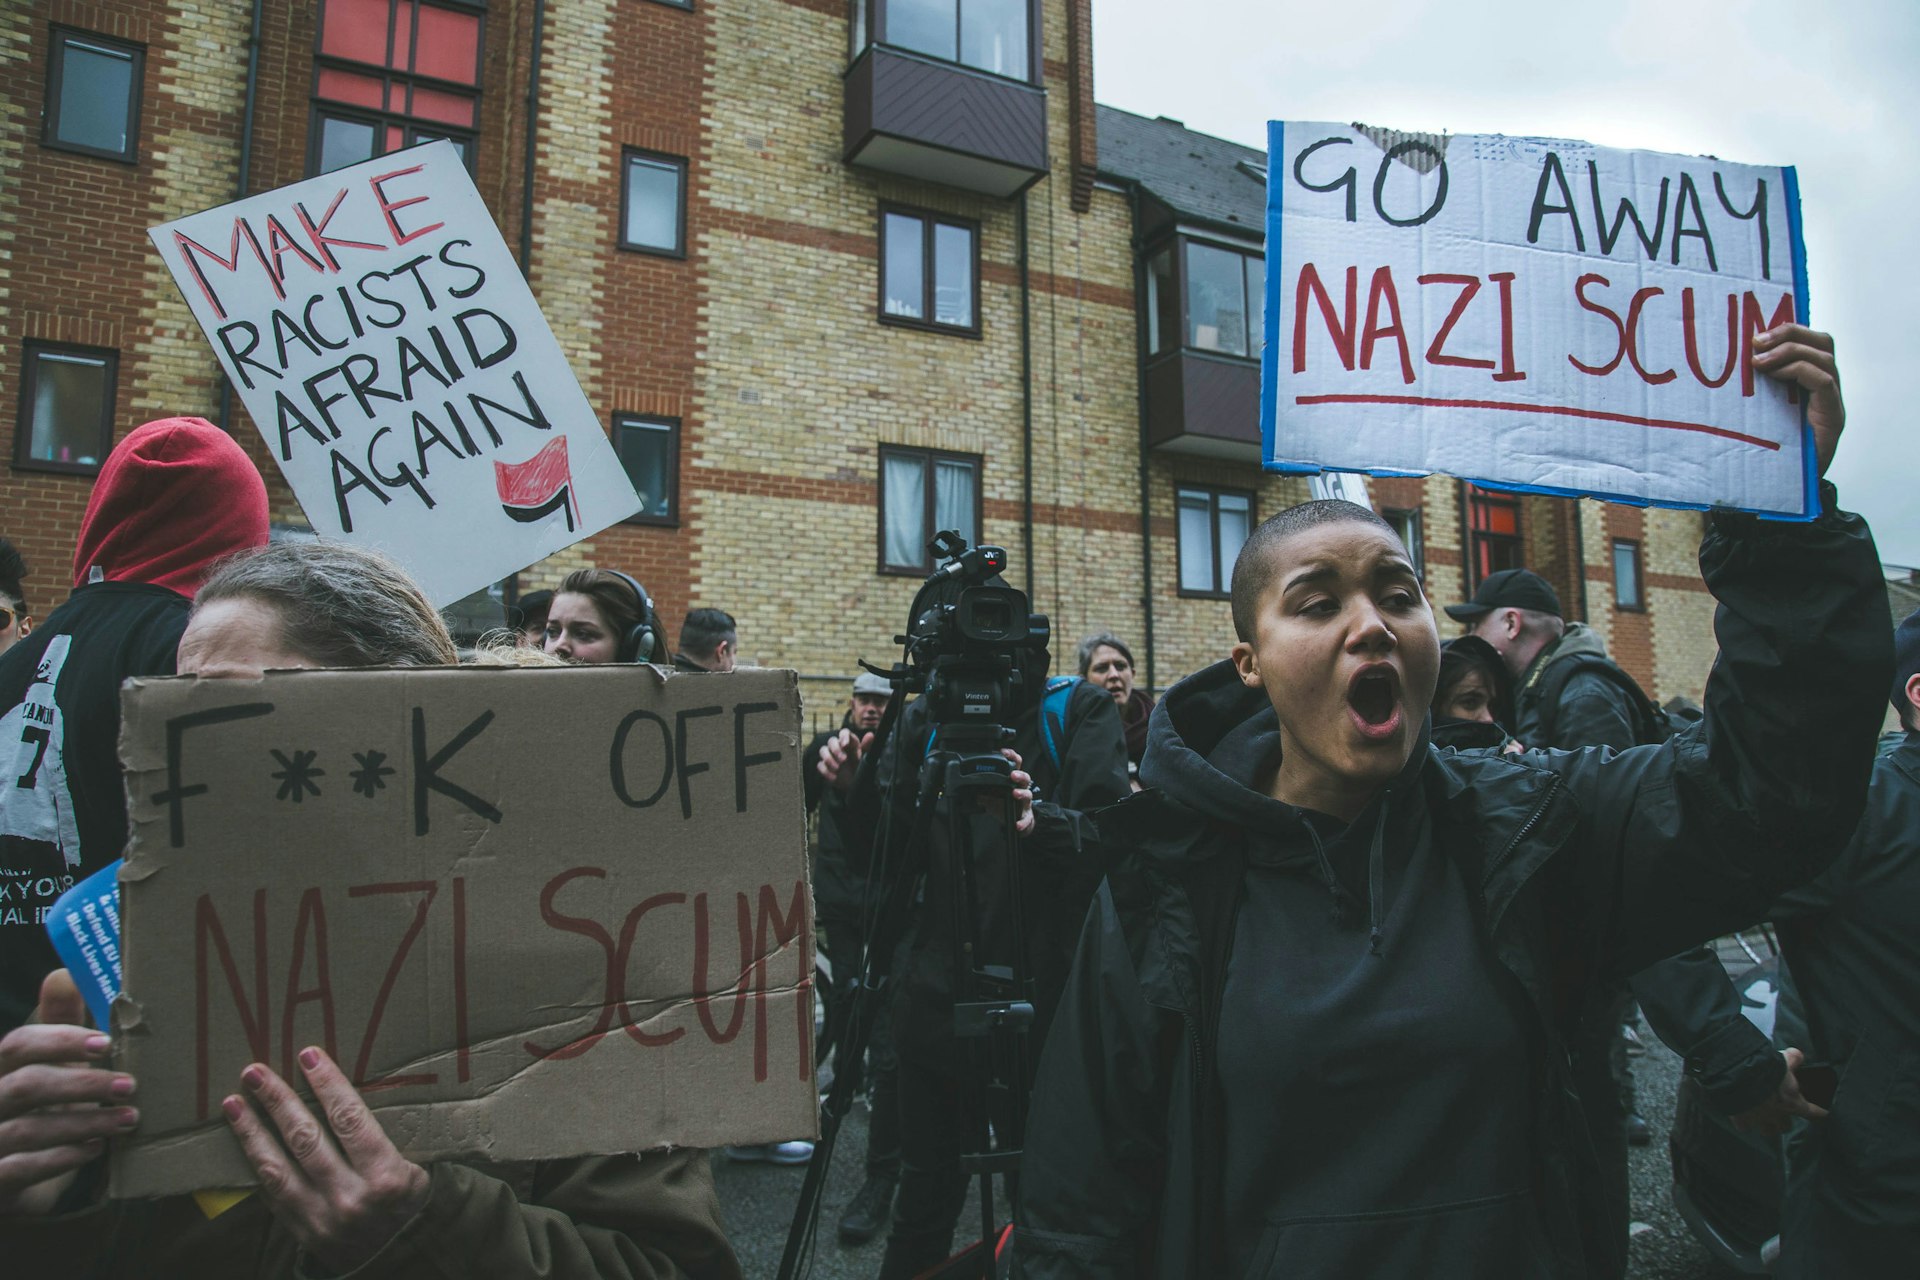 Why is this London art gallery giving neo-Nazis a platform?